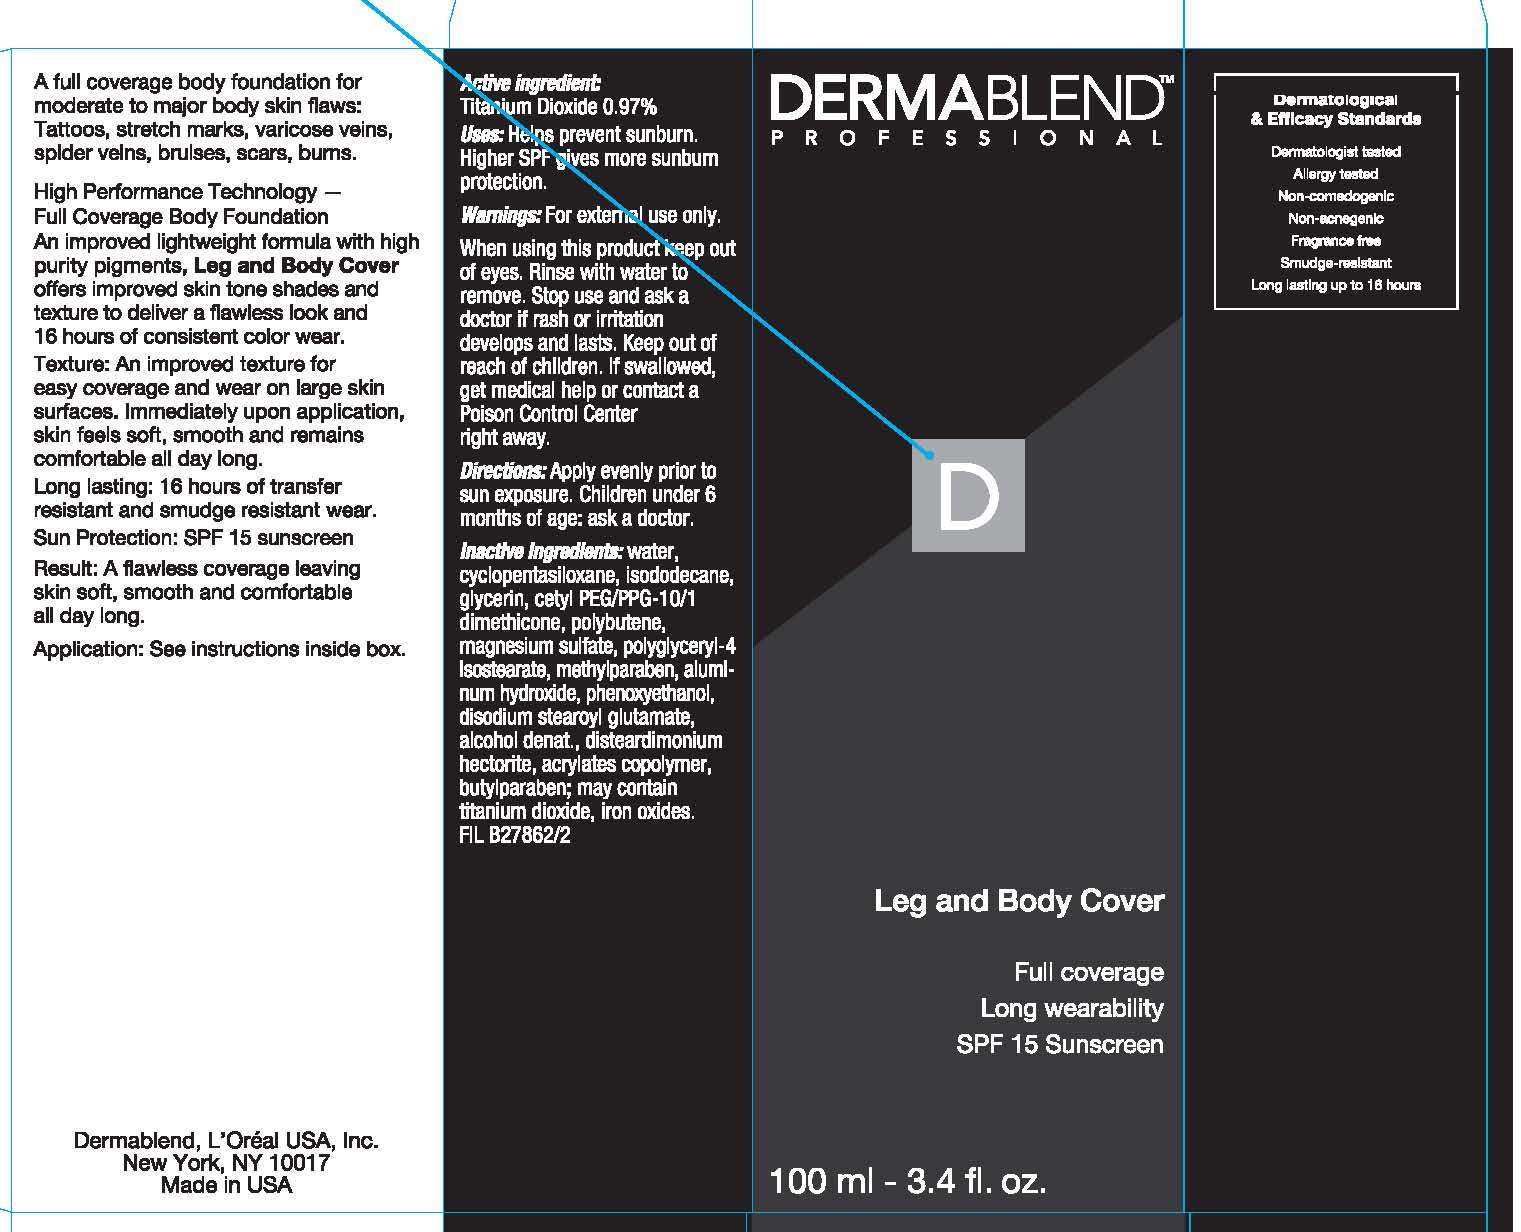 Dermablend Professional Leg and Body Cover